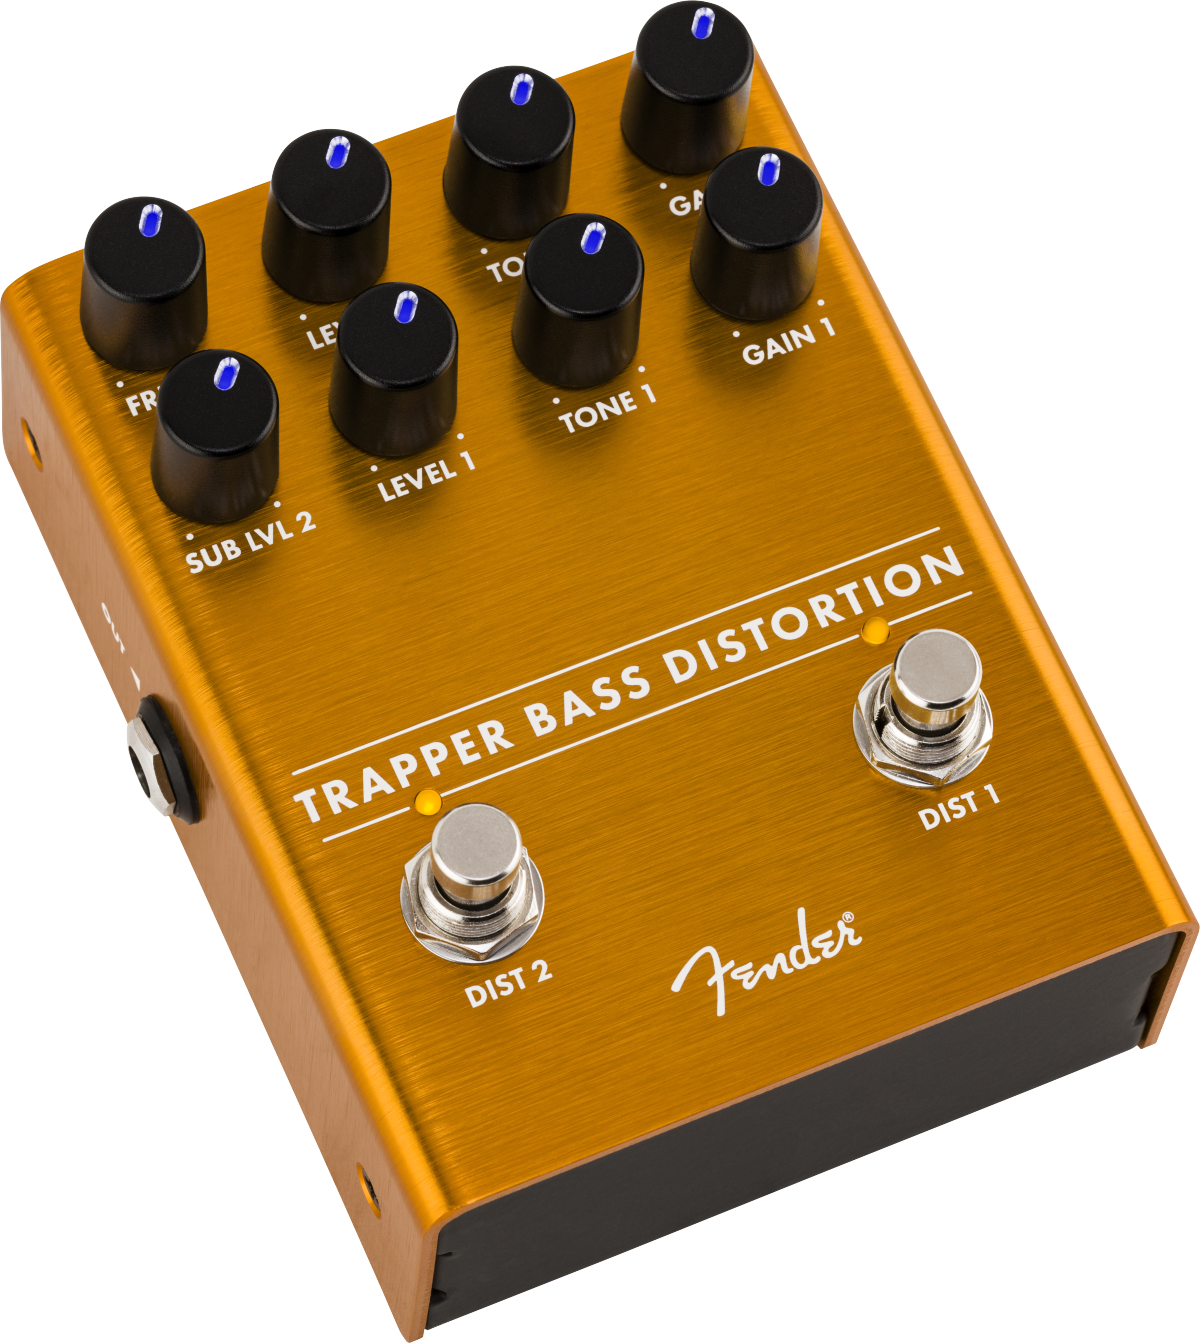 Fender Trapper Bass Distortion - Overdrive, distortion, fuzz effect pedal for bass - Main picture